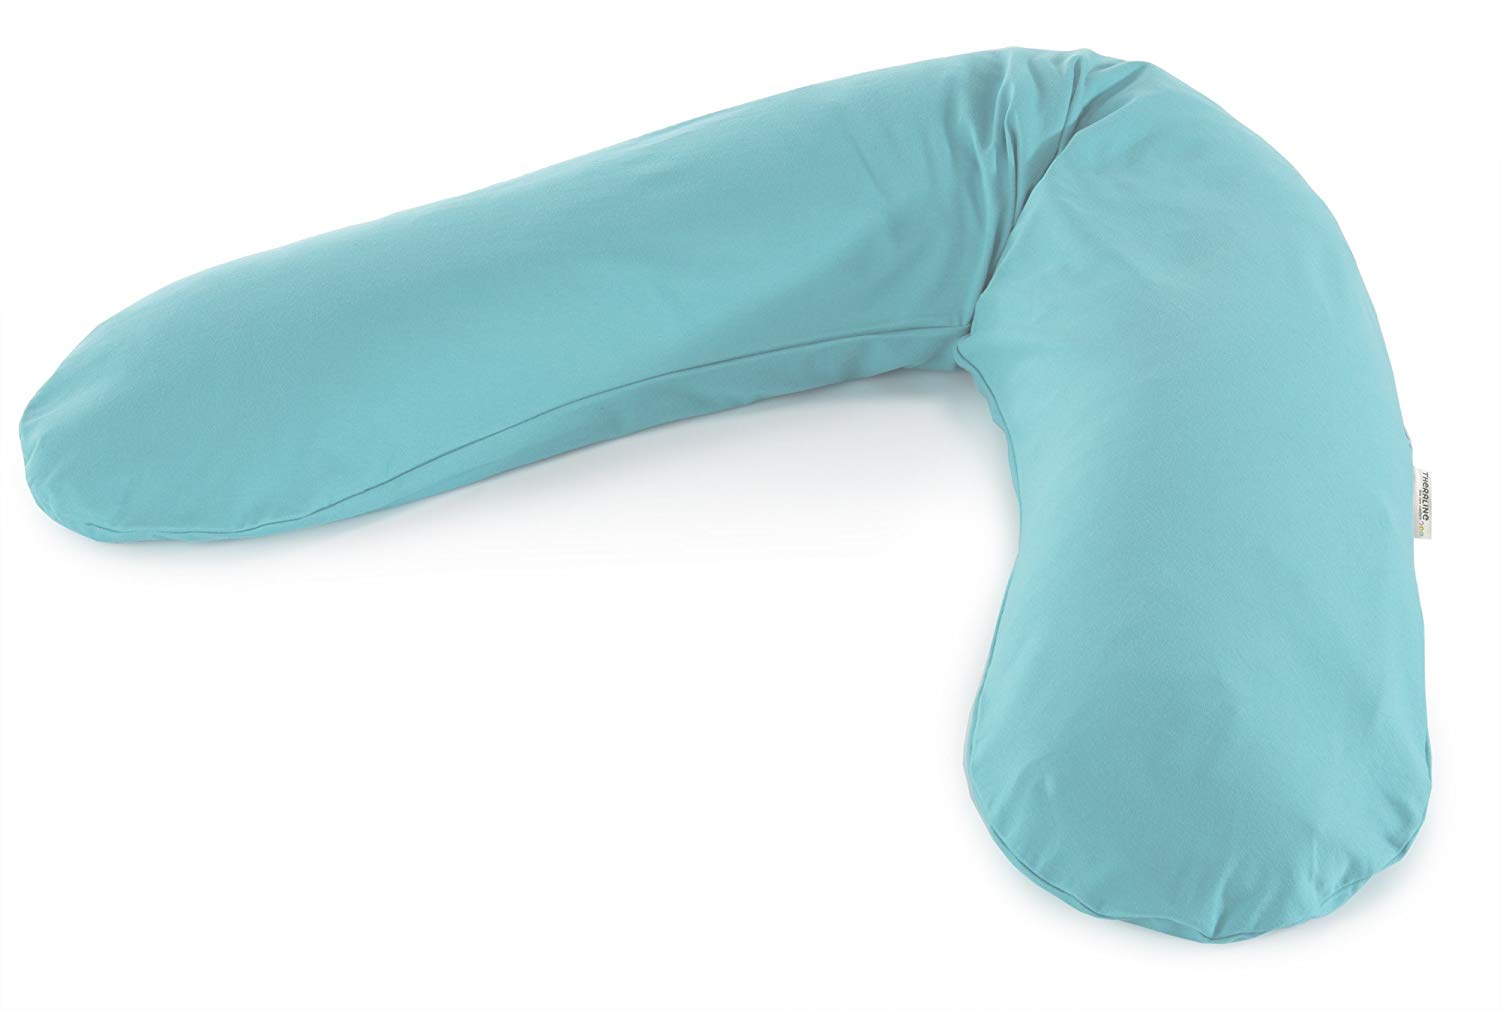 Theraline Jersey Turquoise 51011302 Original Pillow with Cover, 190 cm